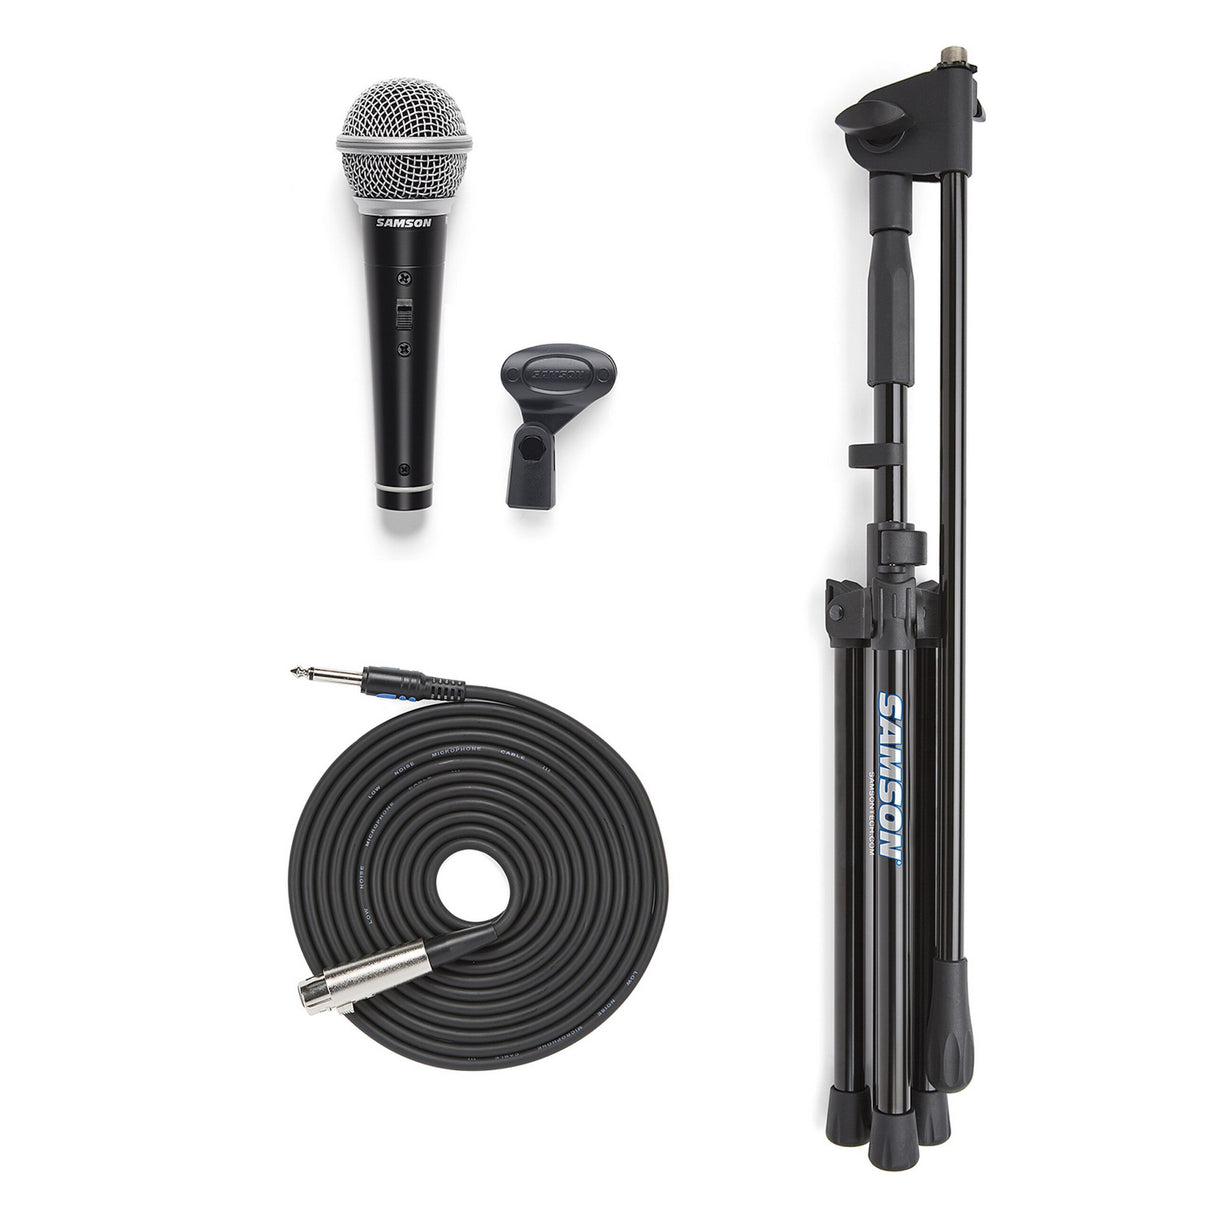 Samson VP10 Dynamic Microphone Value Pack with Tripod Boom Stand